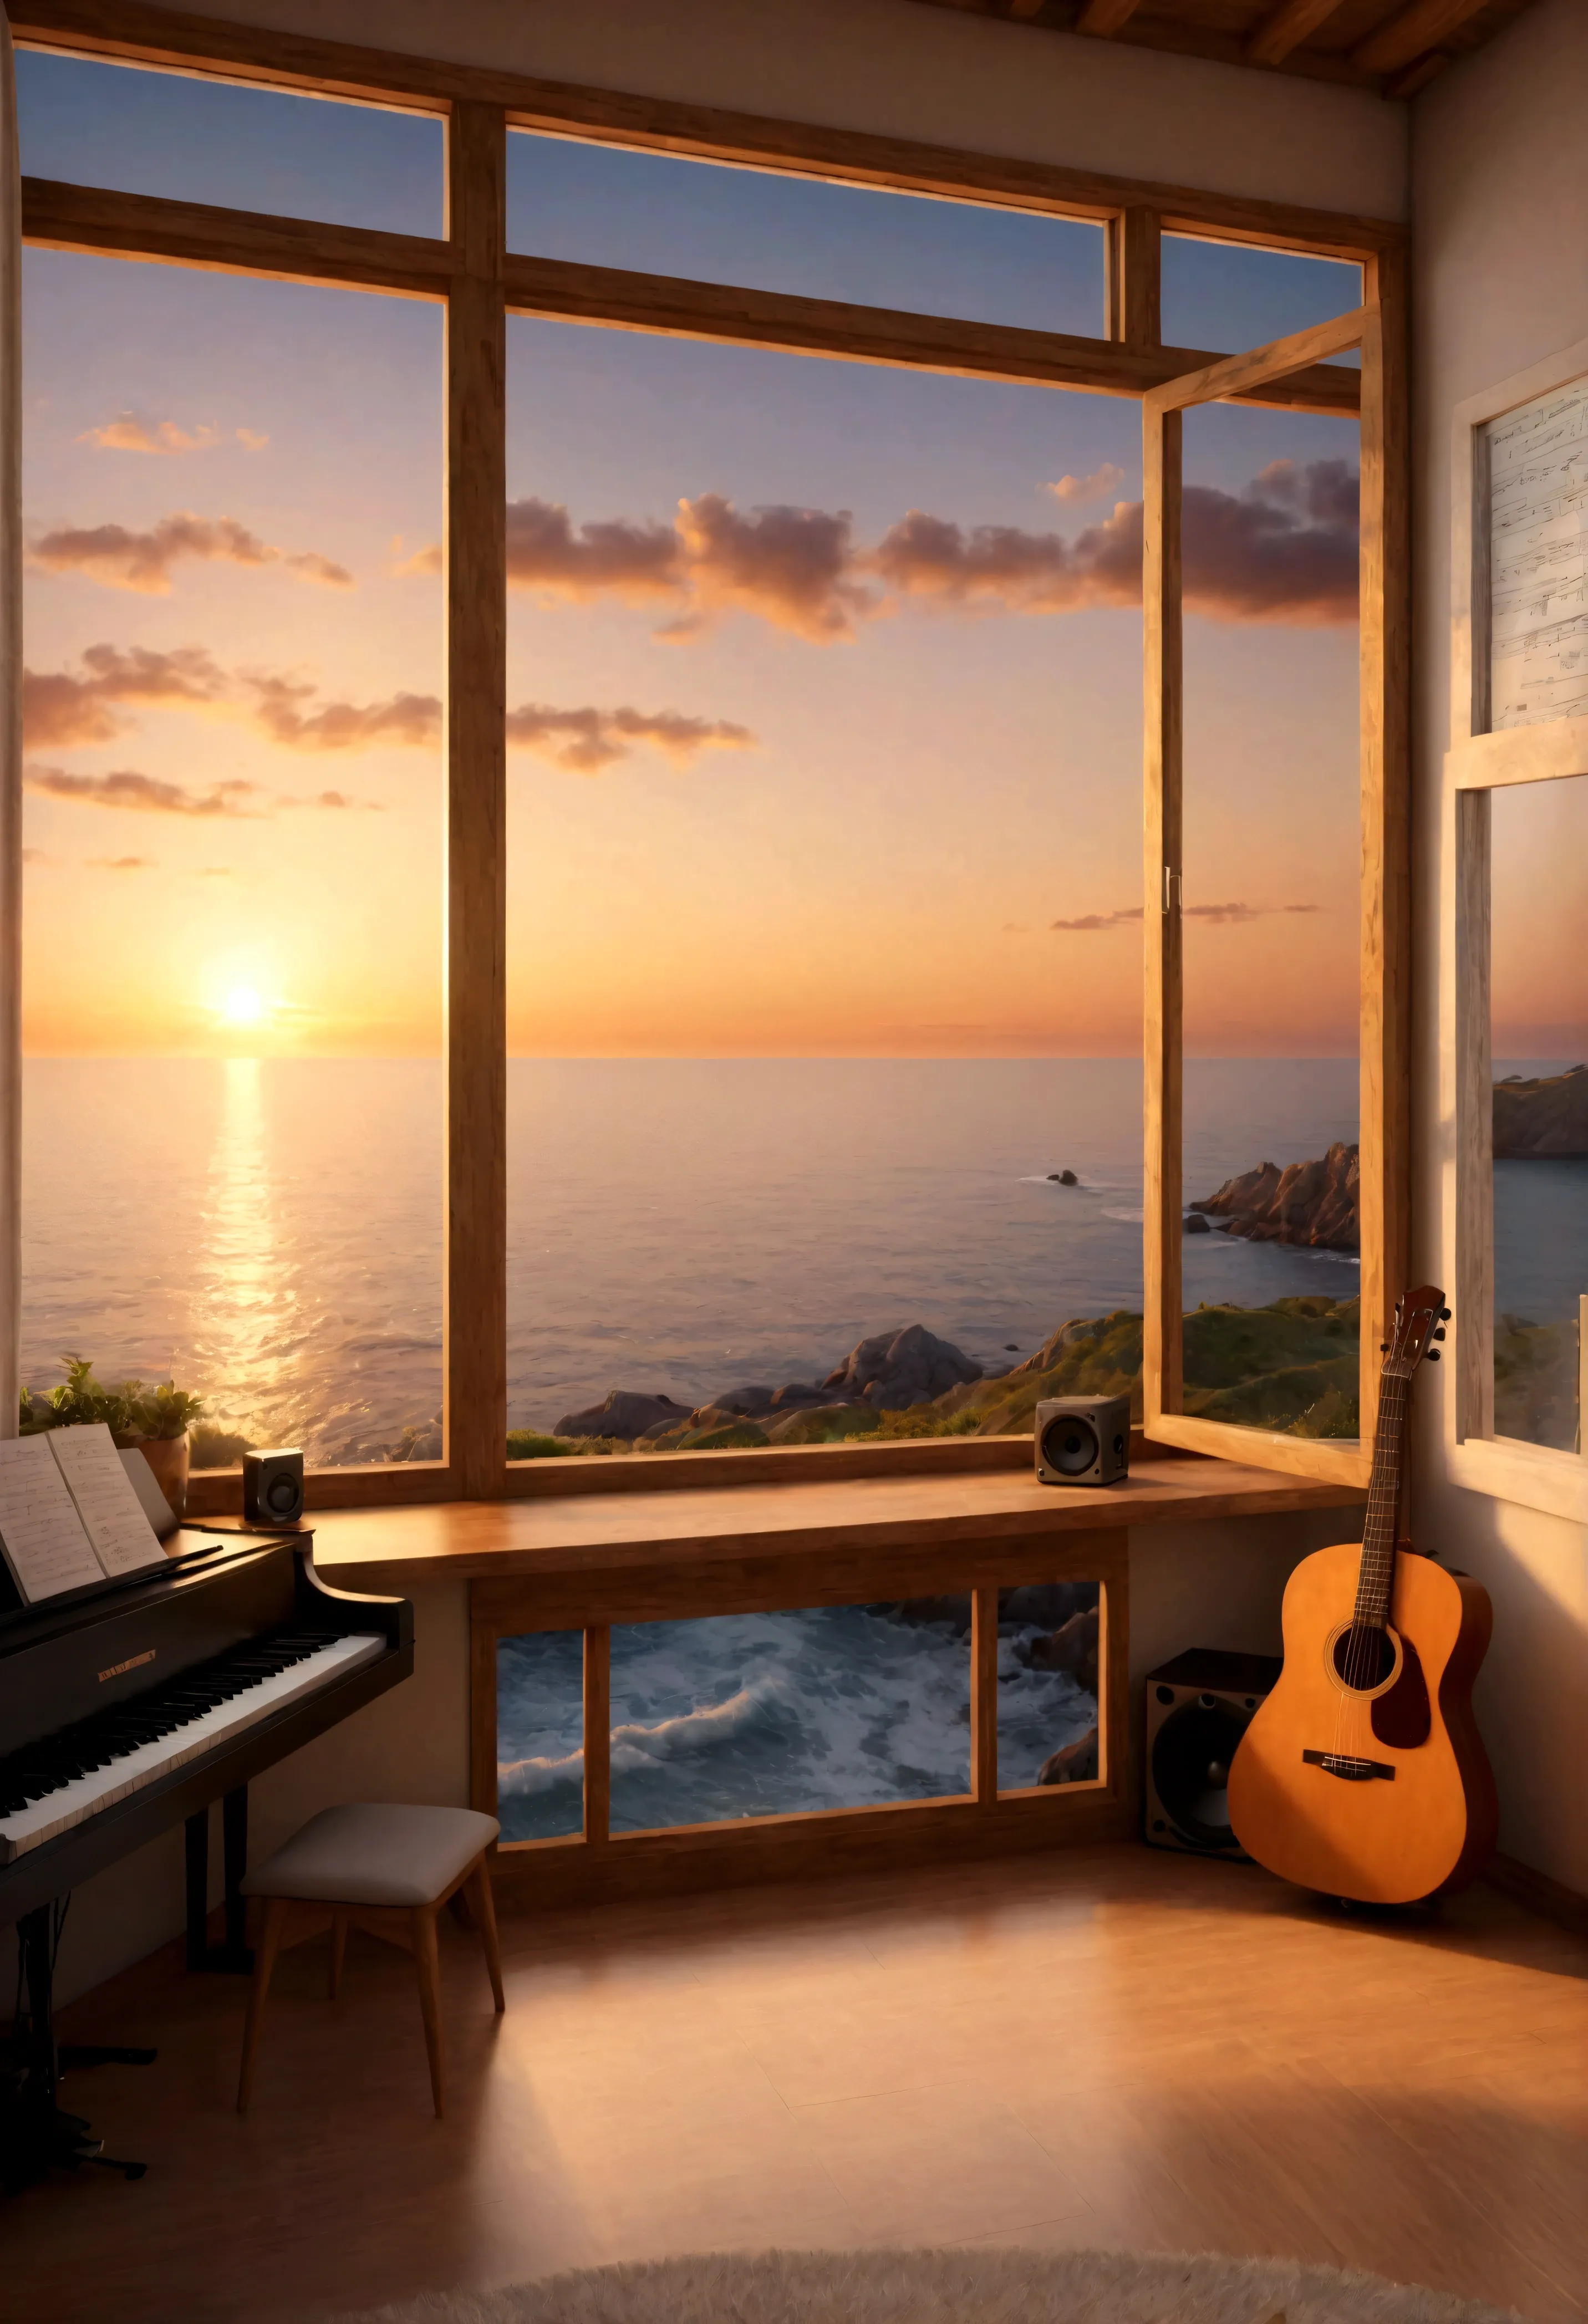 music studio with a seaside view through window,sunset,8k,masterpiece,perfect composition